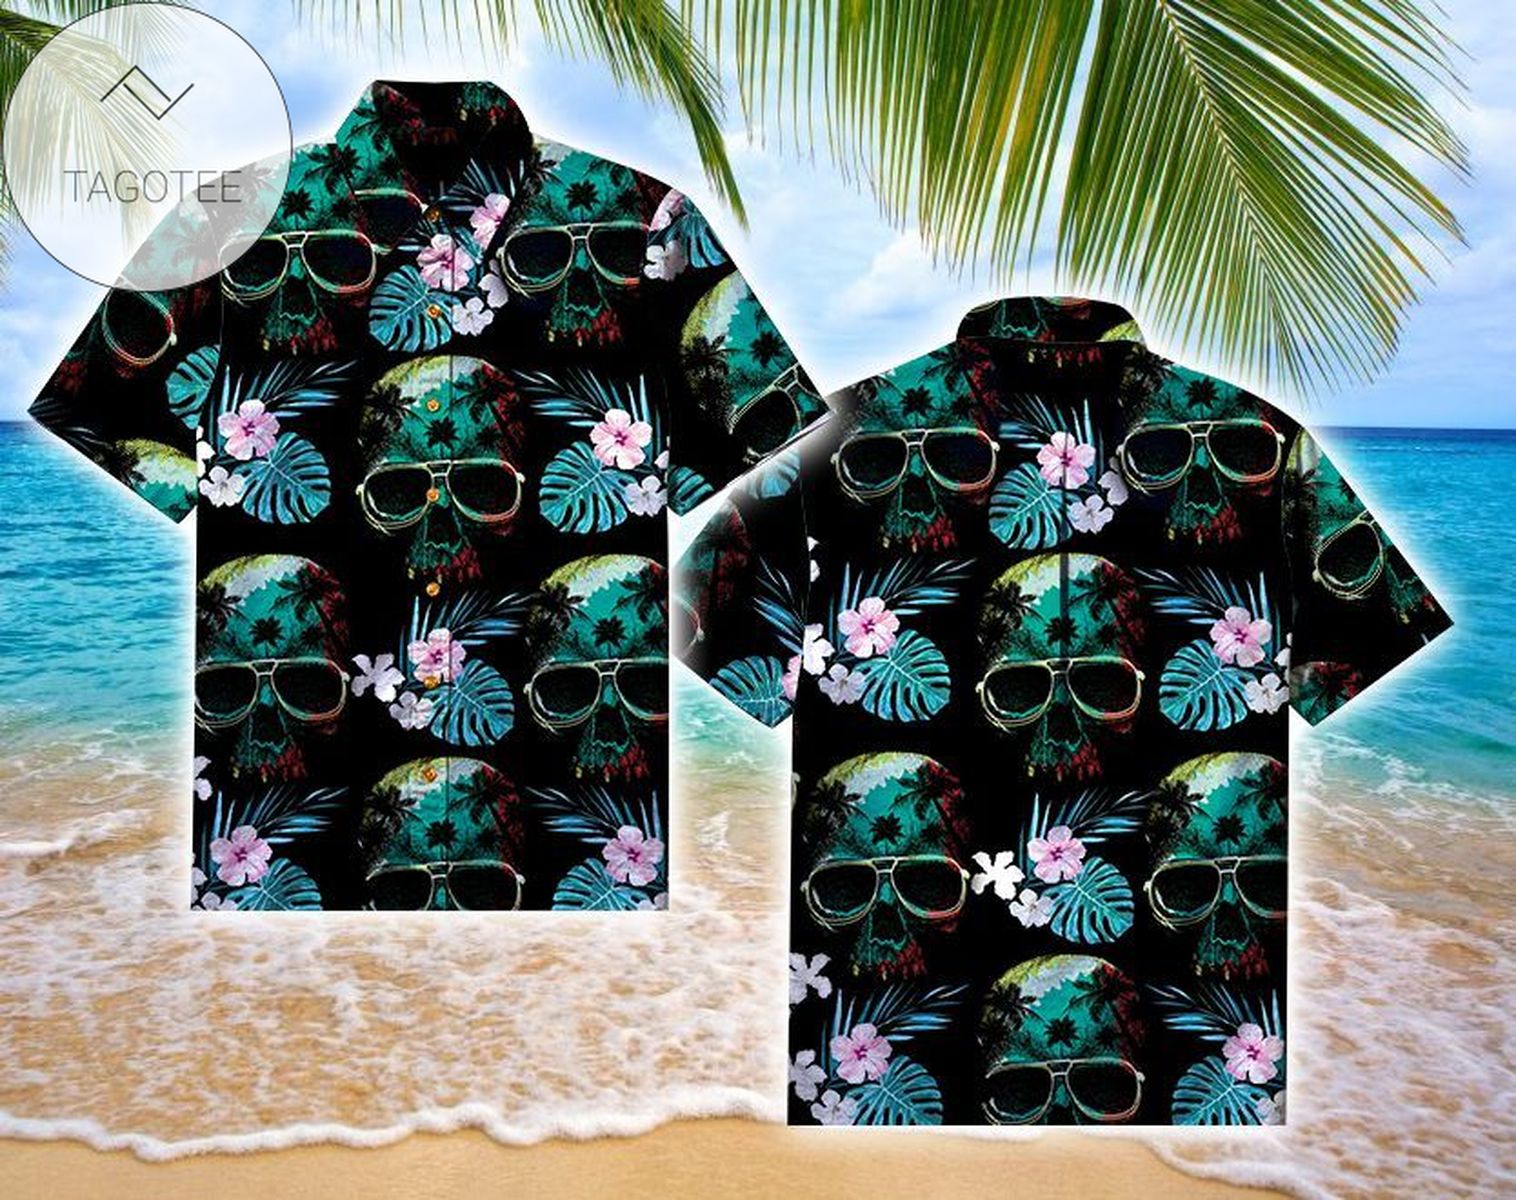 Shop From 1000 Unique Skull Cool Tropical Full Authentic Hawaiian Shirt 2022s